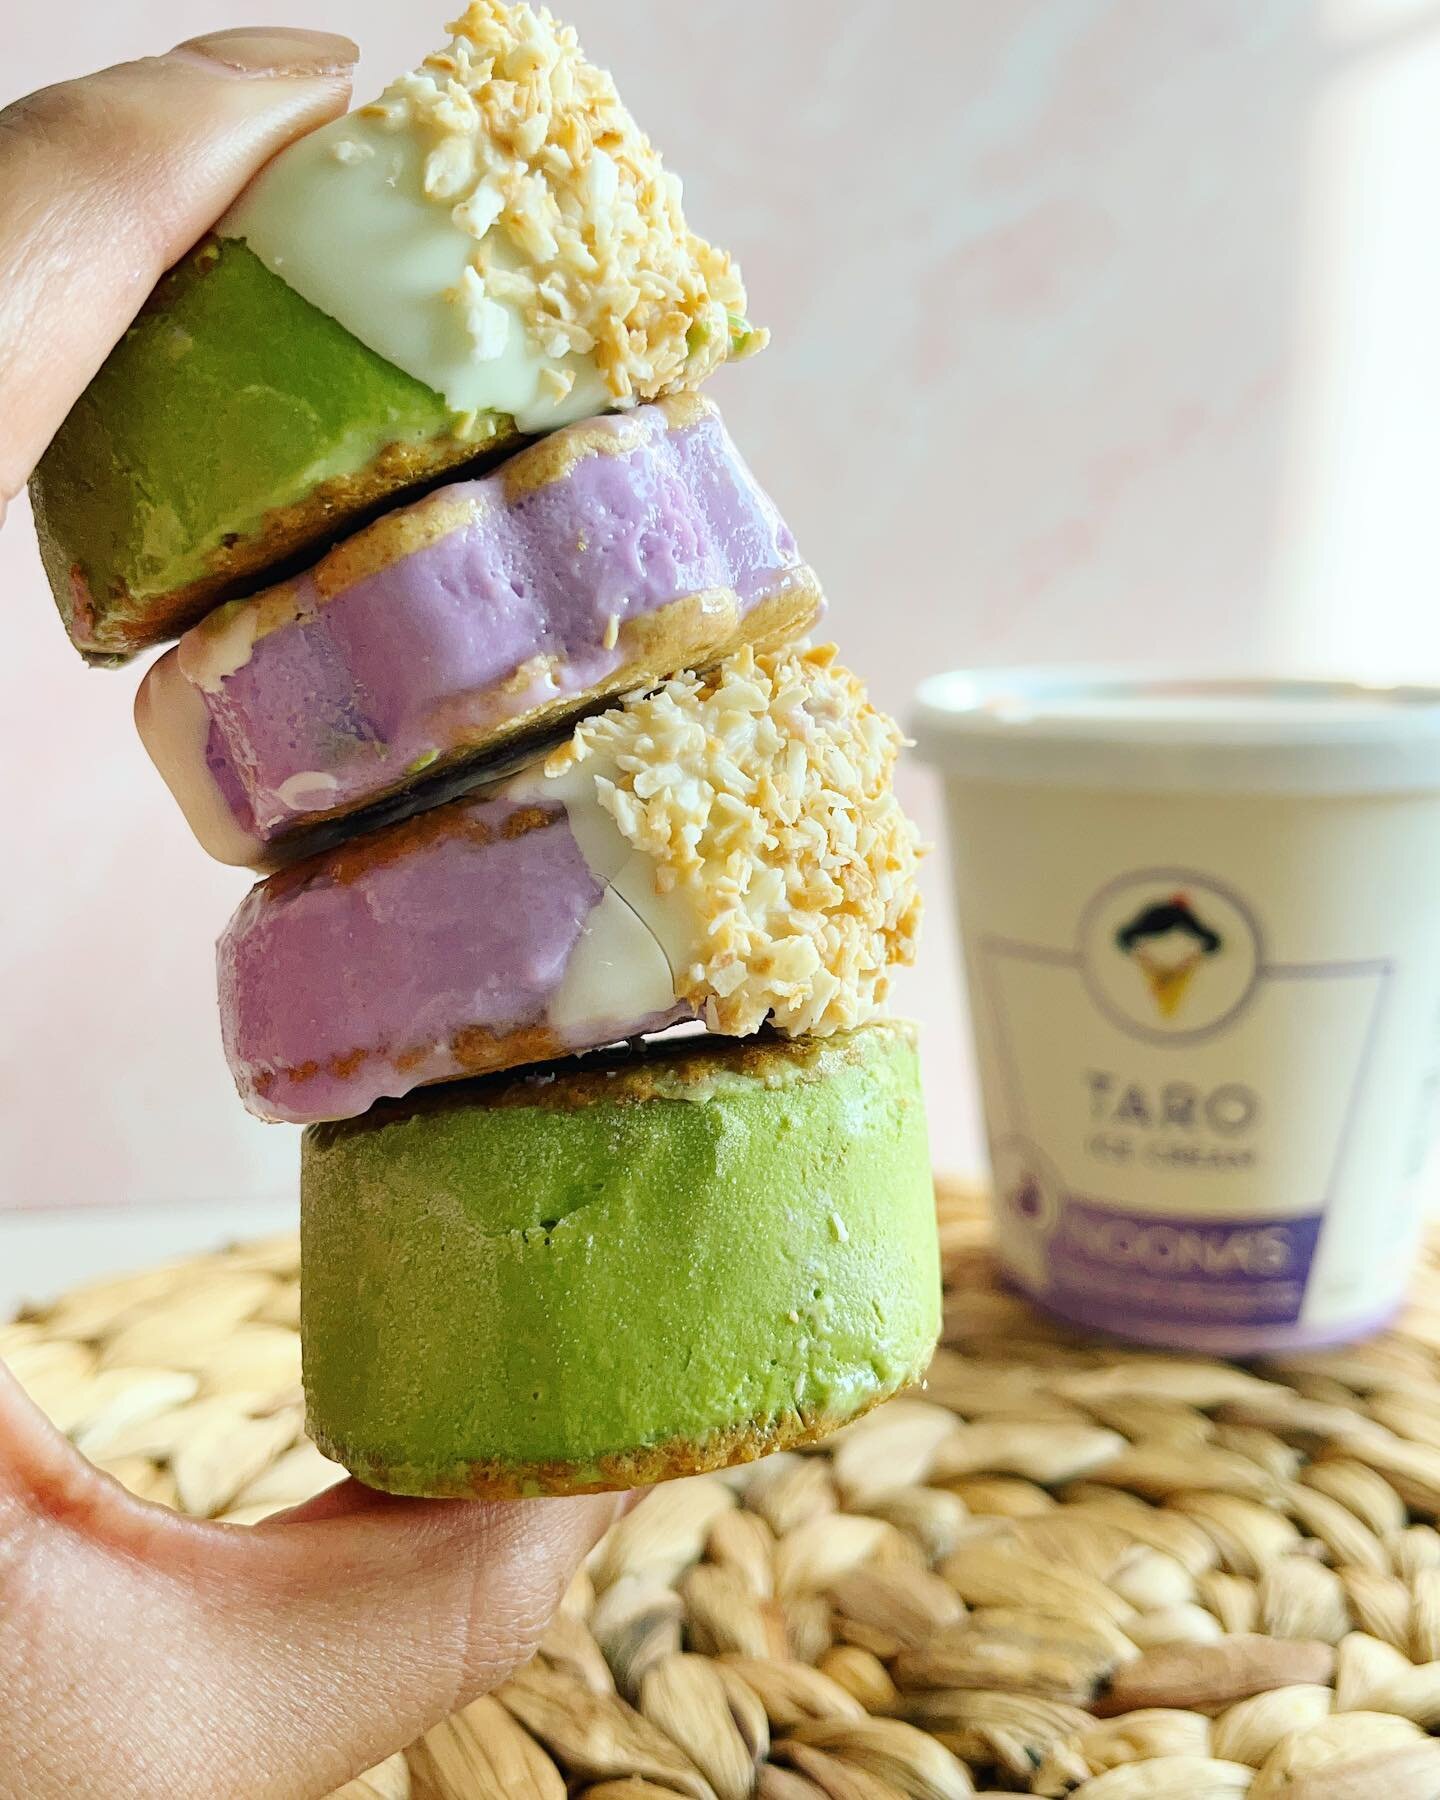 We&rsquo;re digging this color palette! 🌴☯️ 
Not everything is rosy, but there&rsquo;s spring on the mind.

Pictured here is our Taro and Matcha Green Tea Ice Cream sandwiched between gingery cookies dipped in white chocolate and toasted coconut fla